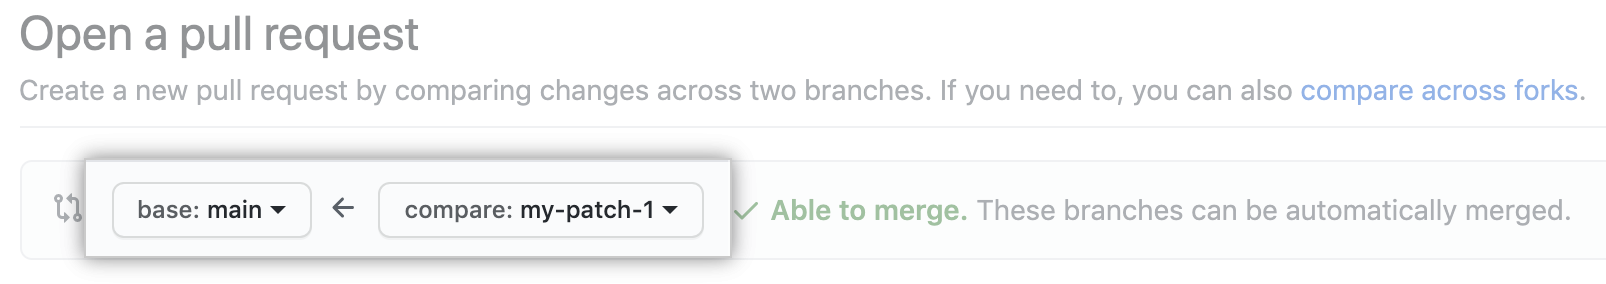 choose-base-and-compare-branches.png